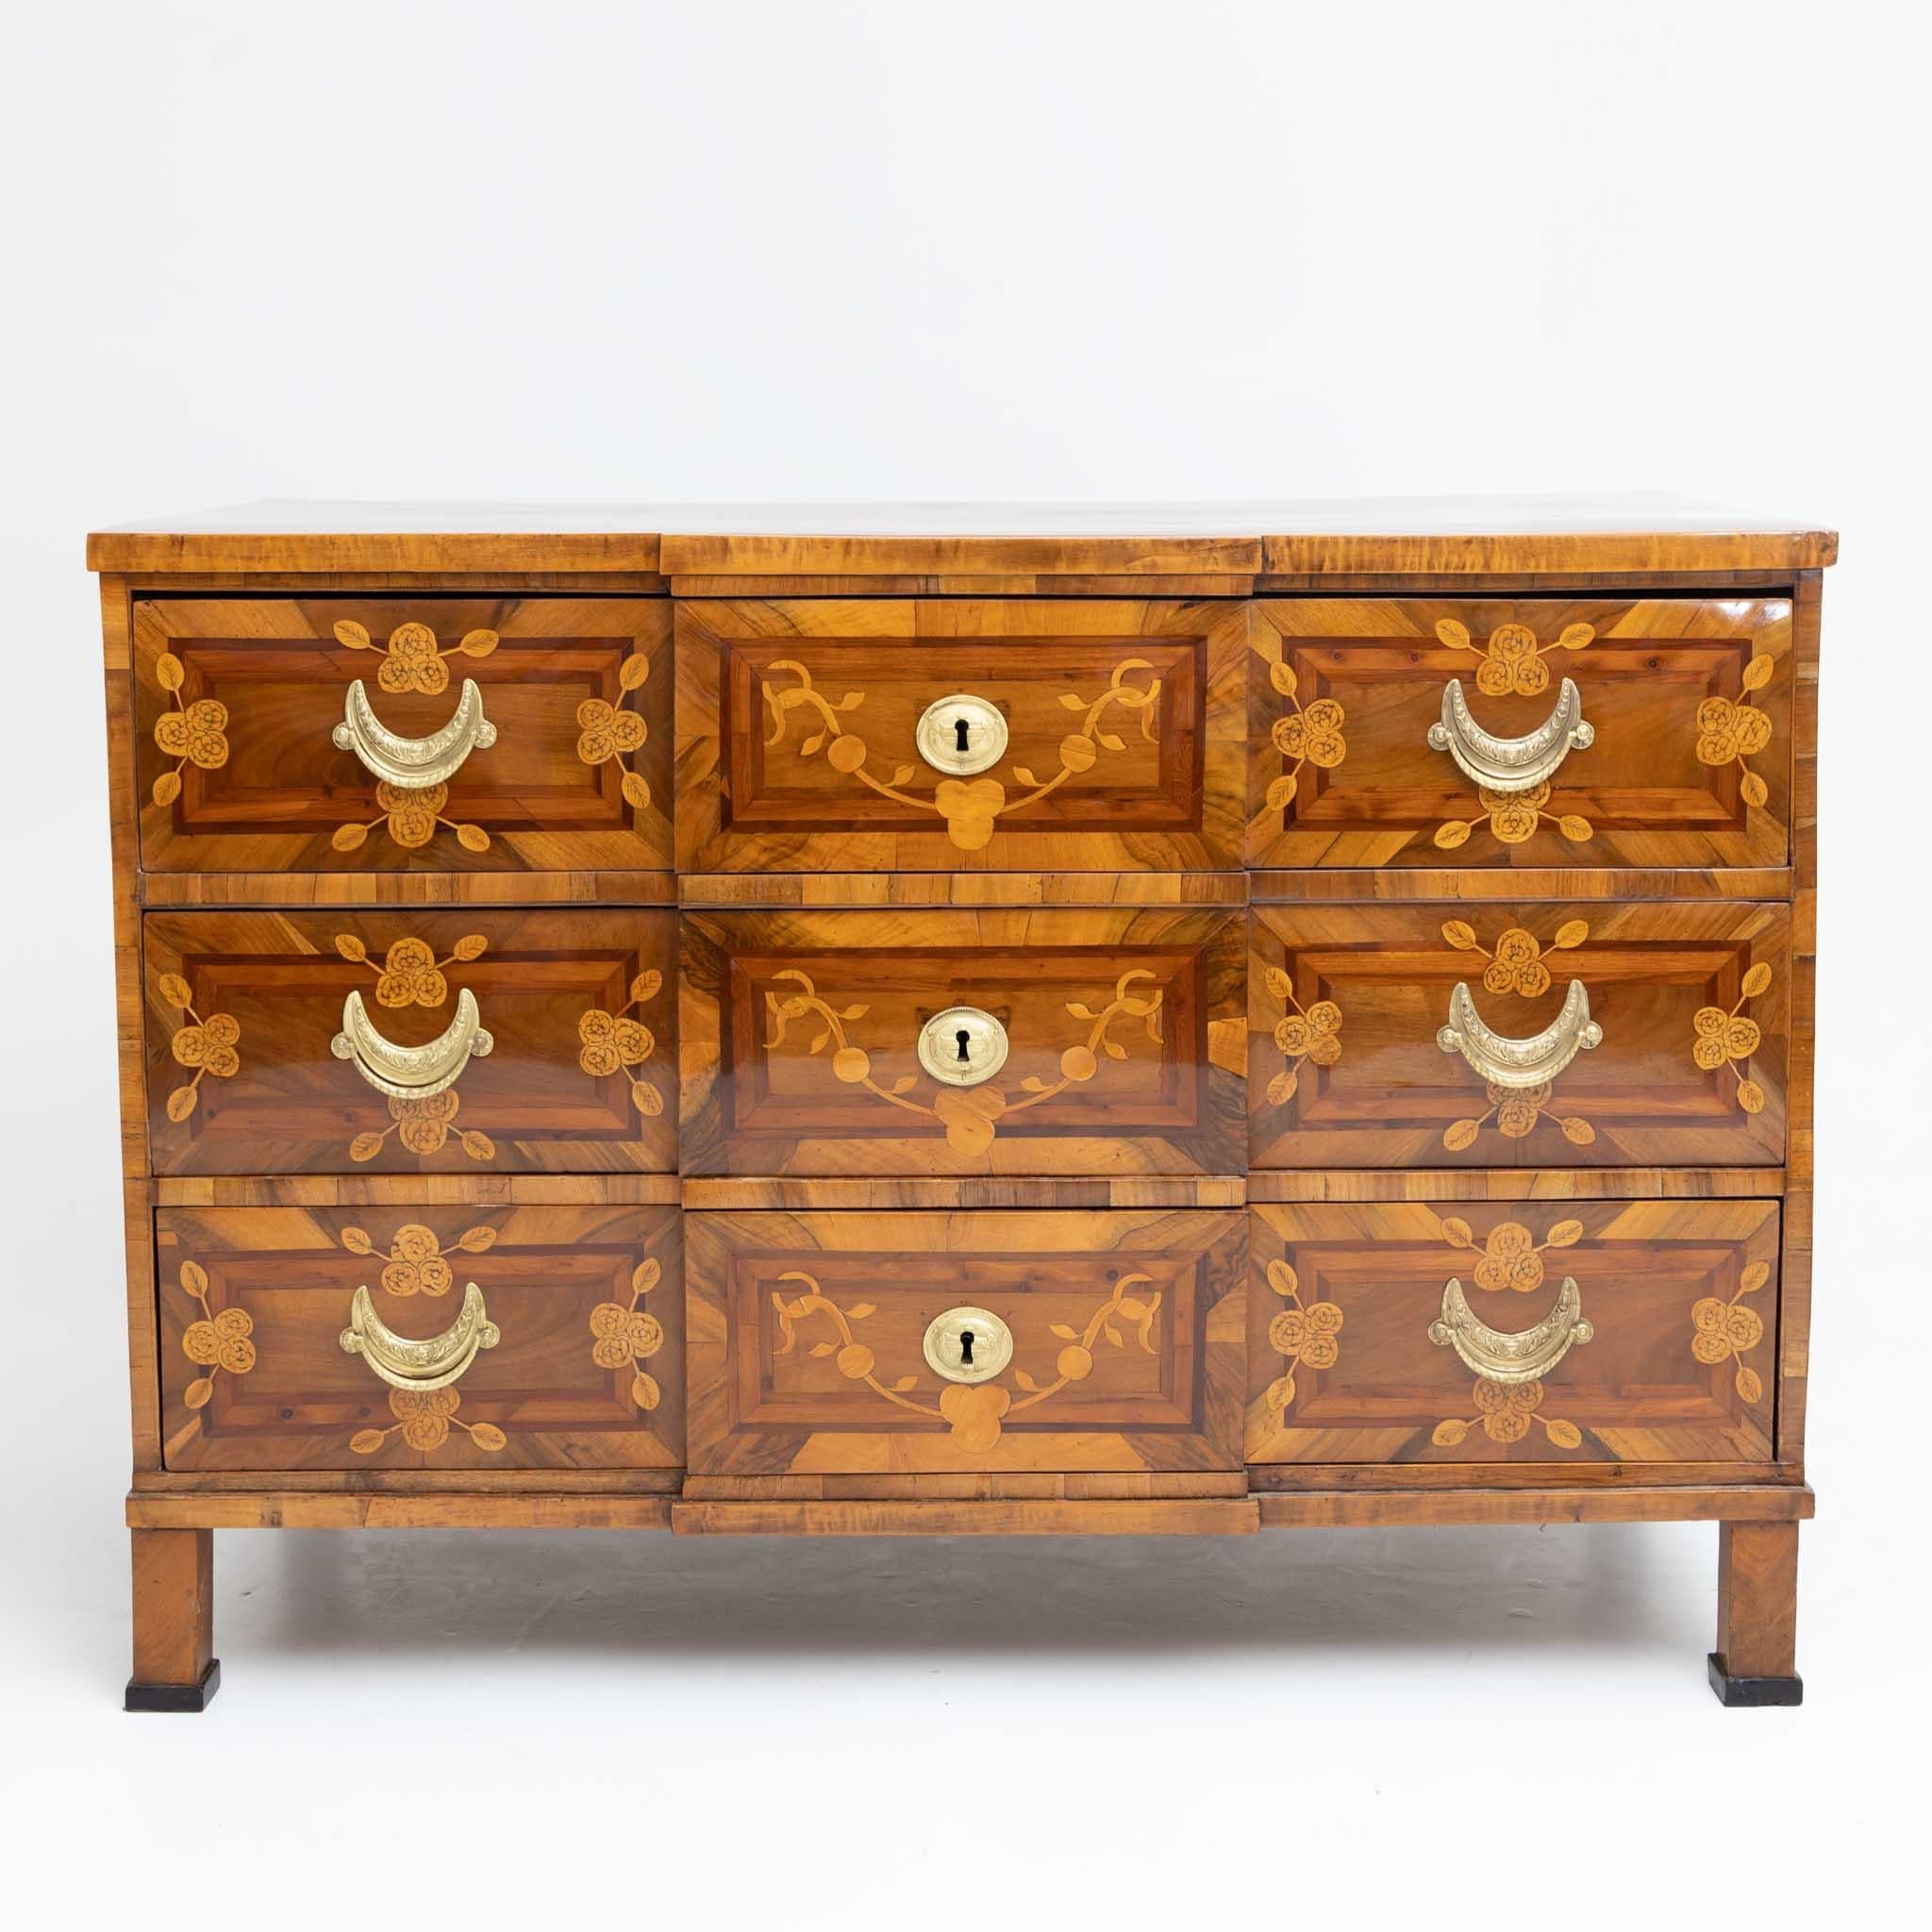 Louis seize chest of drawers with three drawers and rectilinear body with central risalit. The chest of drawers stands on socketed square feet and shows half-moon shaped fittings on the front. The chest of drawers is richly marked on all sides with